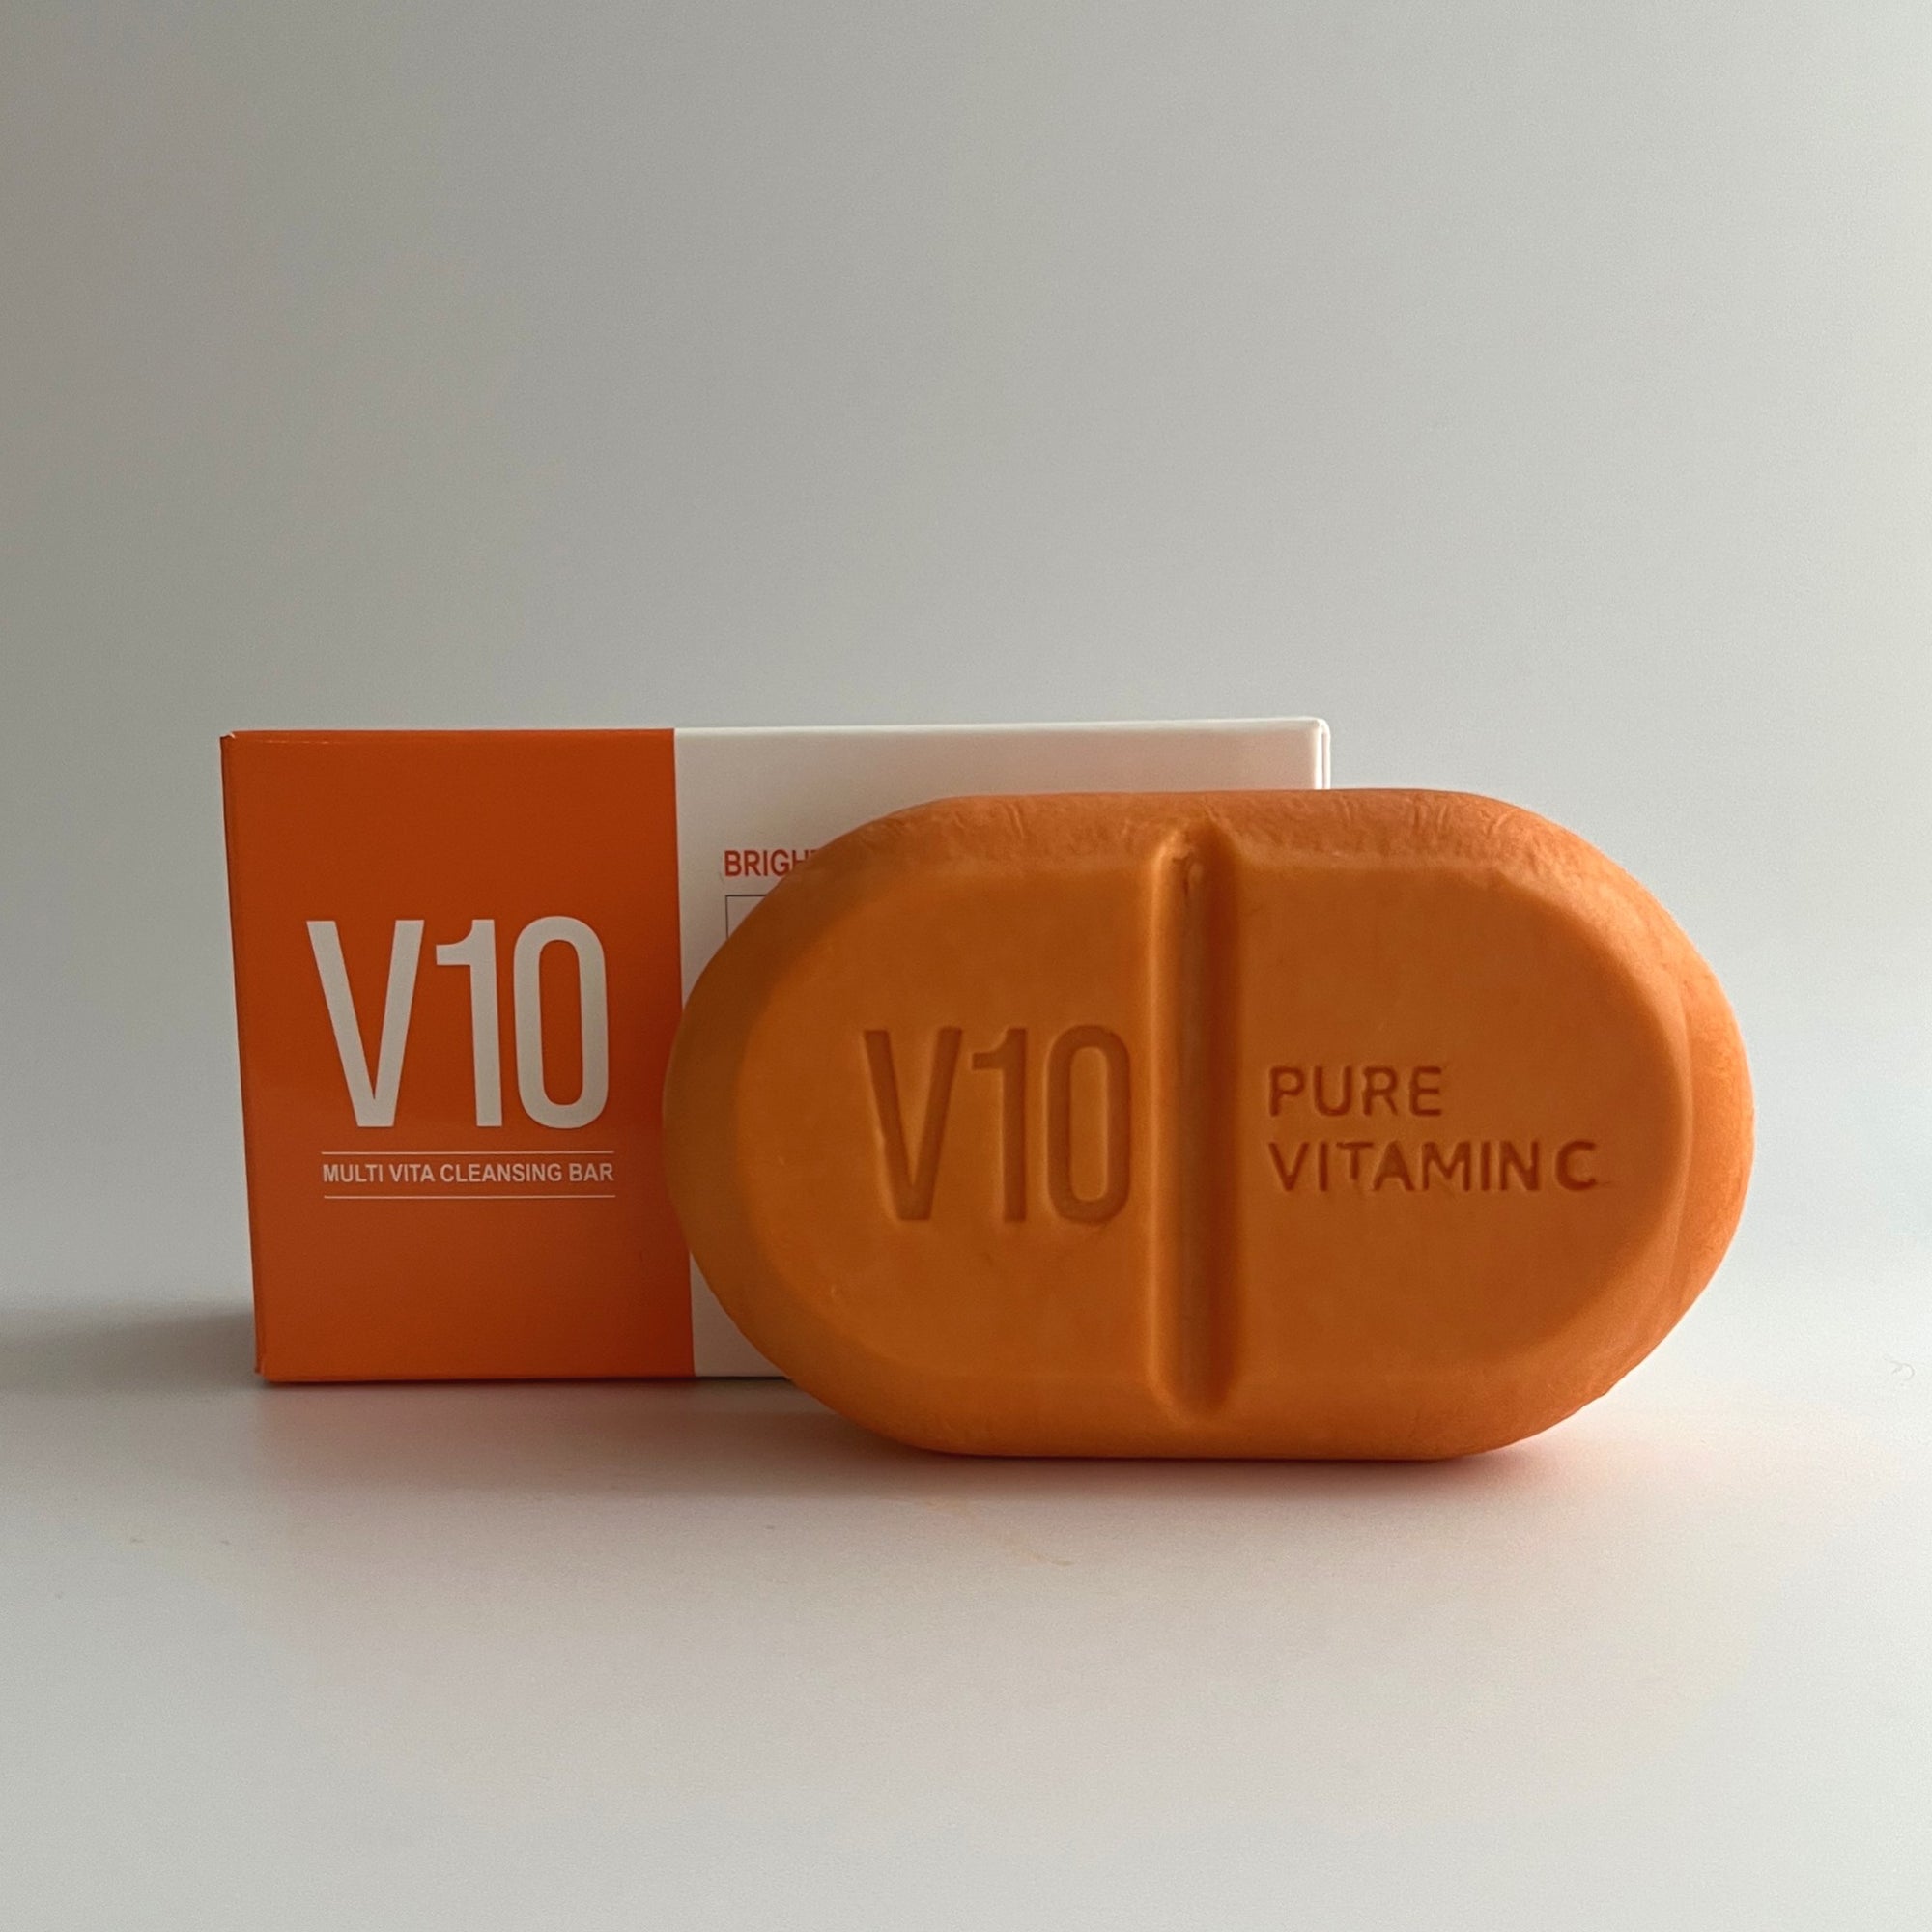 Some By Mi - Pure Vitamin C V10 Cleansing Bar 95g Some By Mi